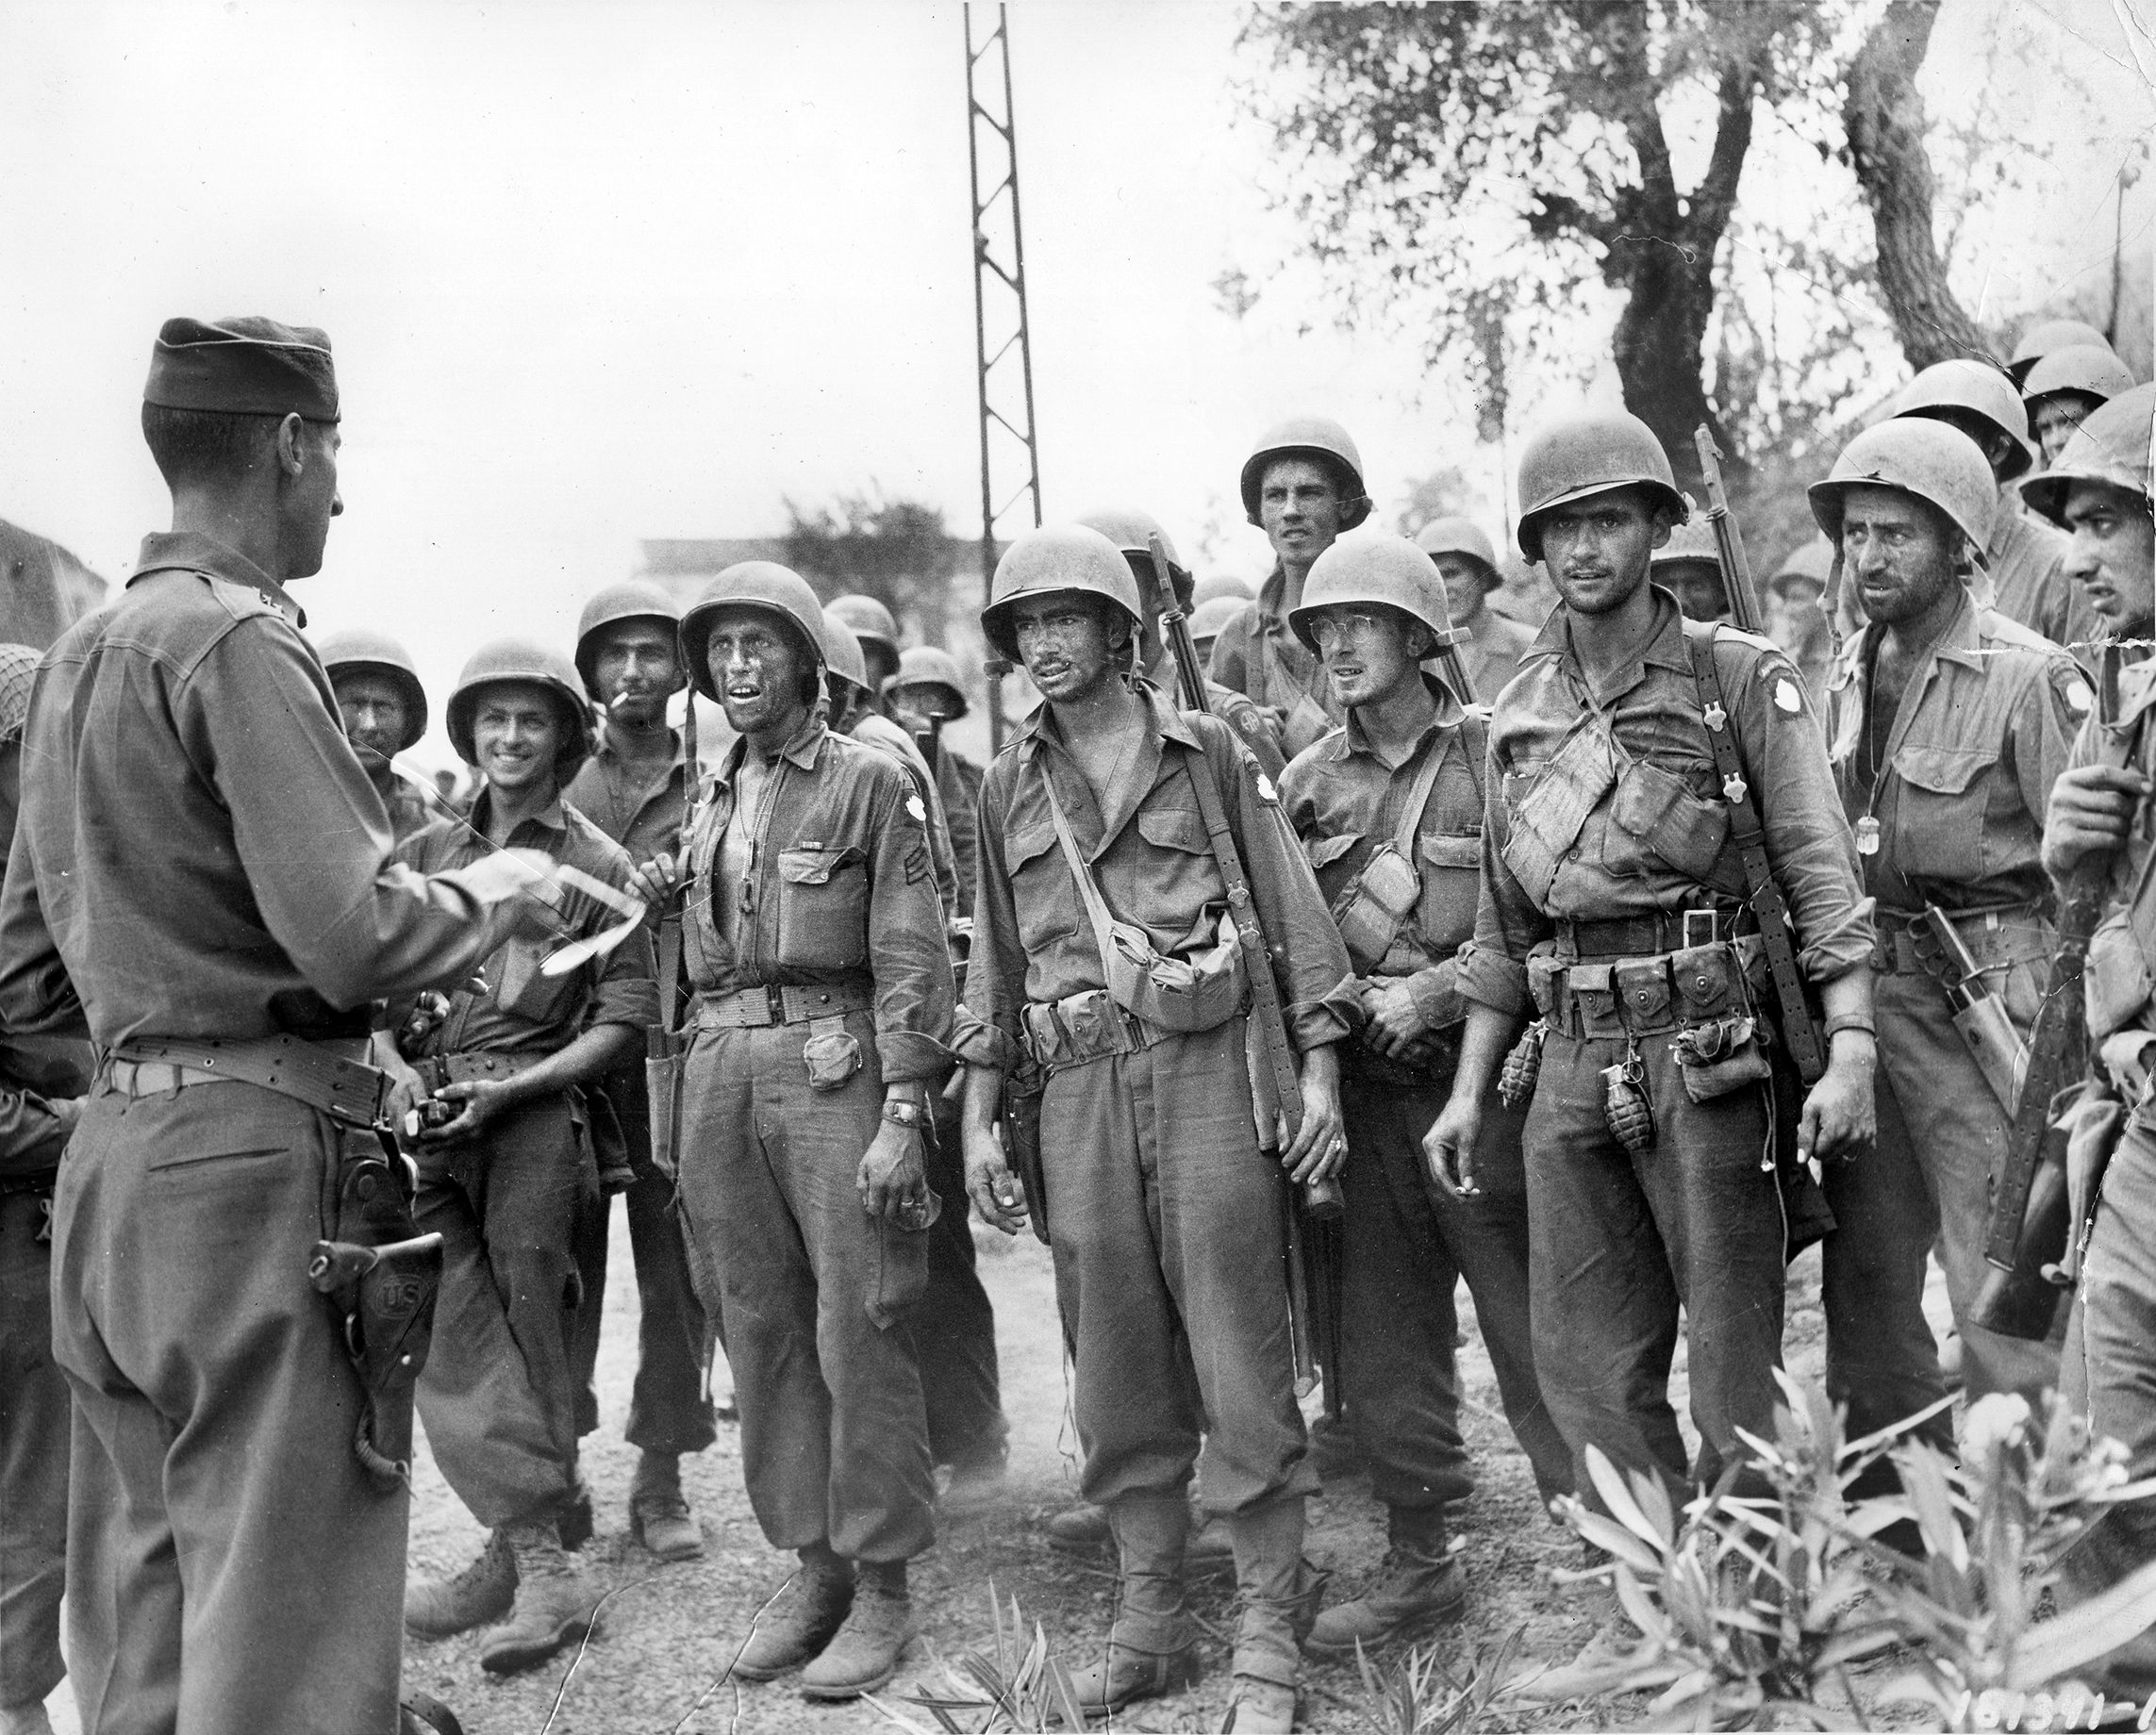 General Mark W. Clark, commander of the Allied Fifth Army at Salerno, briefs troopers of the 82nd Airborne Division prior to a mission during the invasion of the Italian mainland in late 1943. The Salerno beachhead was threatened but held against repeated German counterattacks.